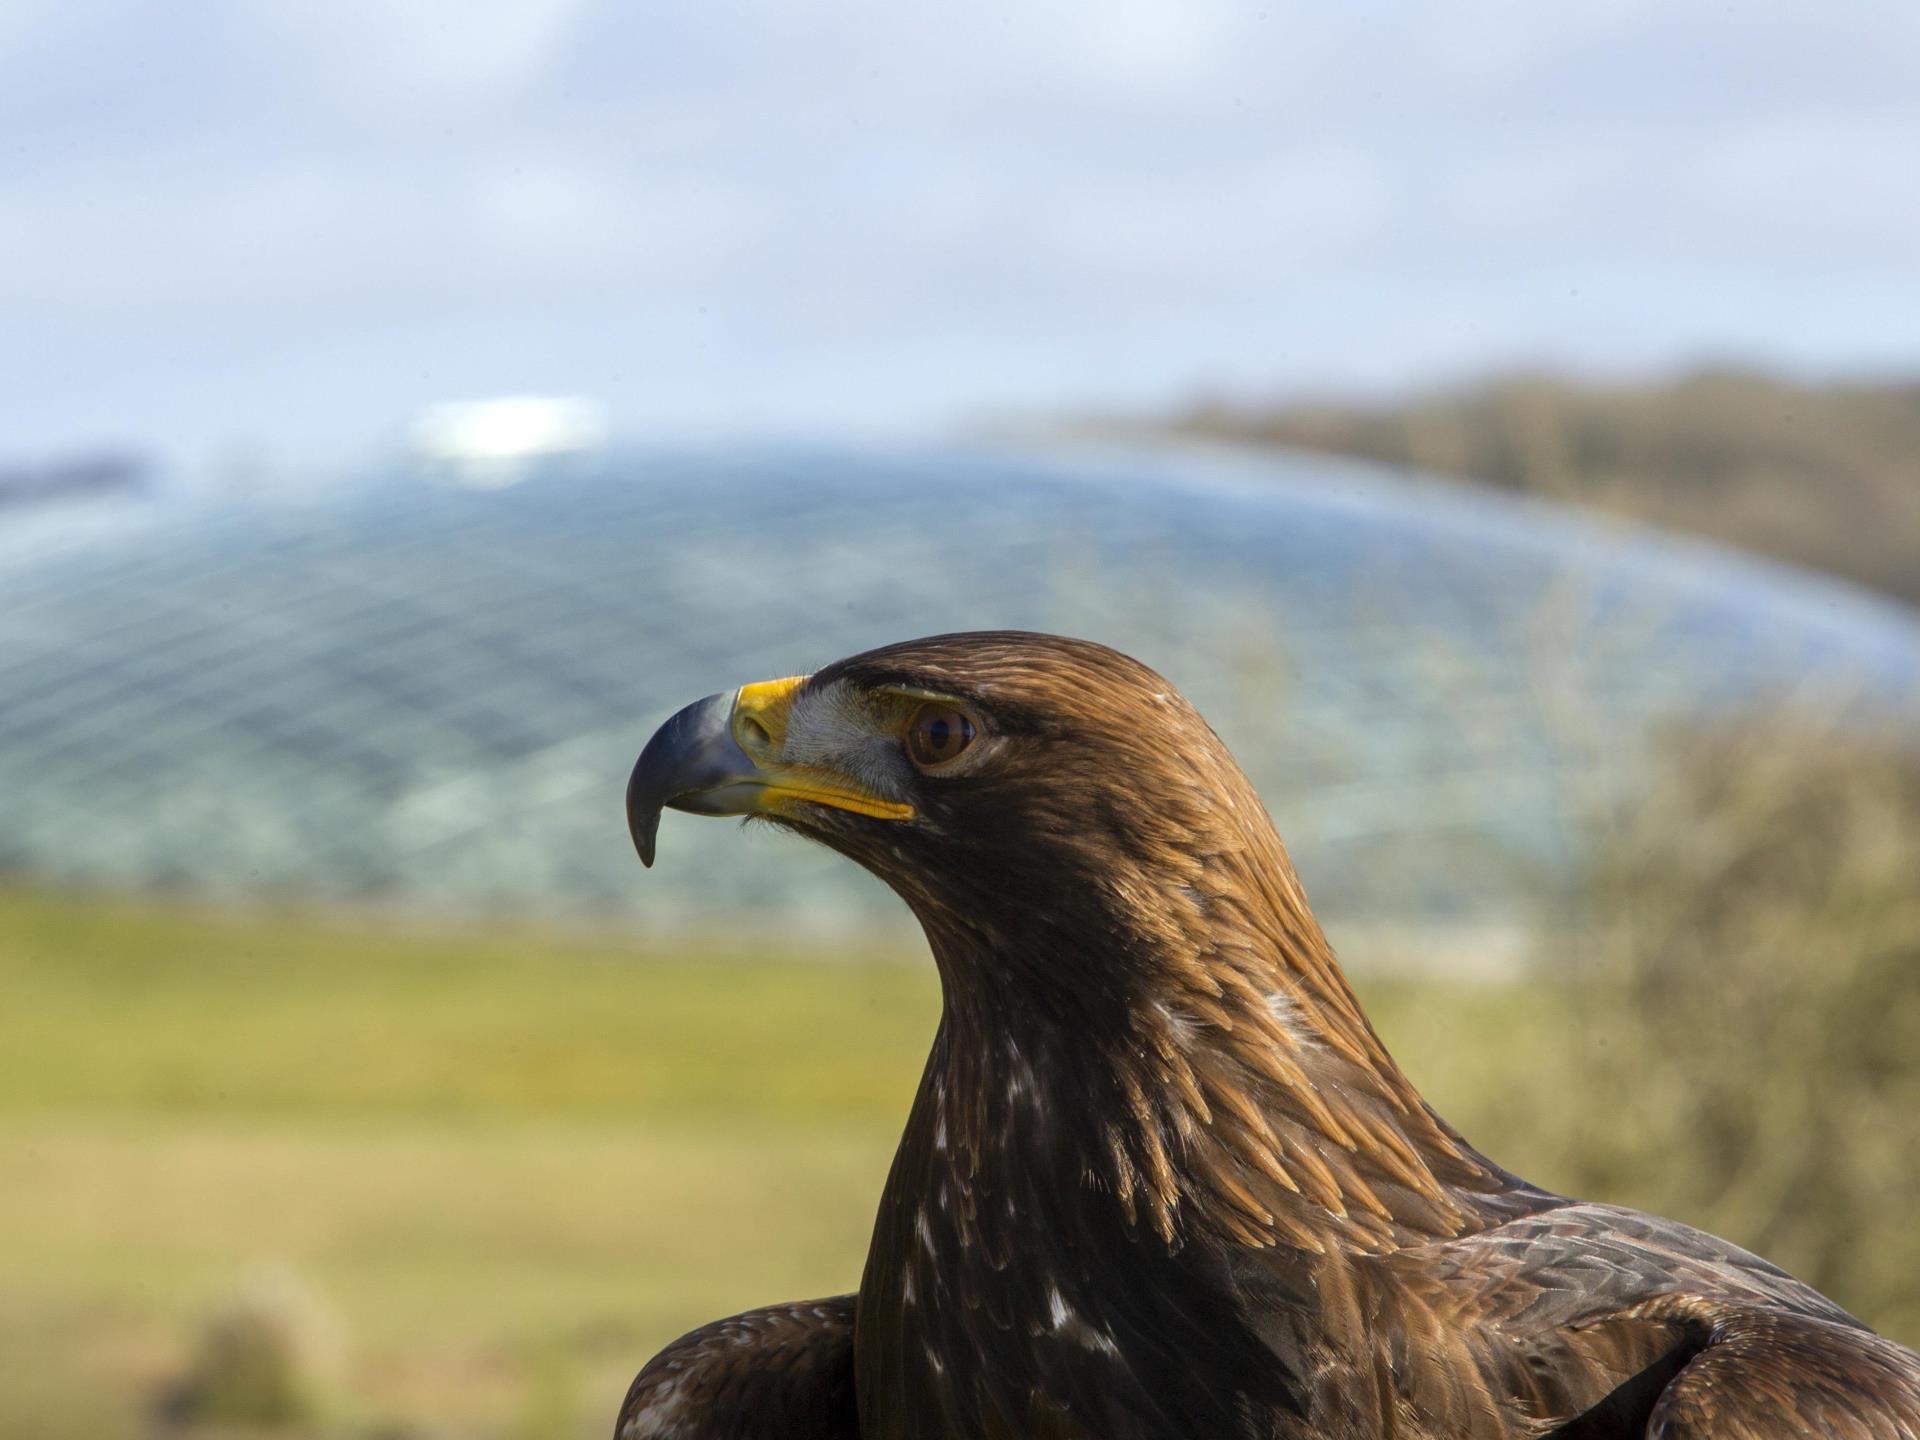 See a golden eagle fly at the Botanic Garden